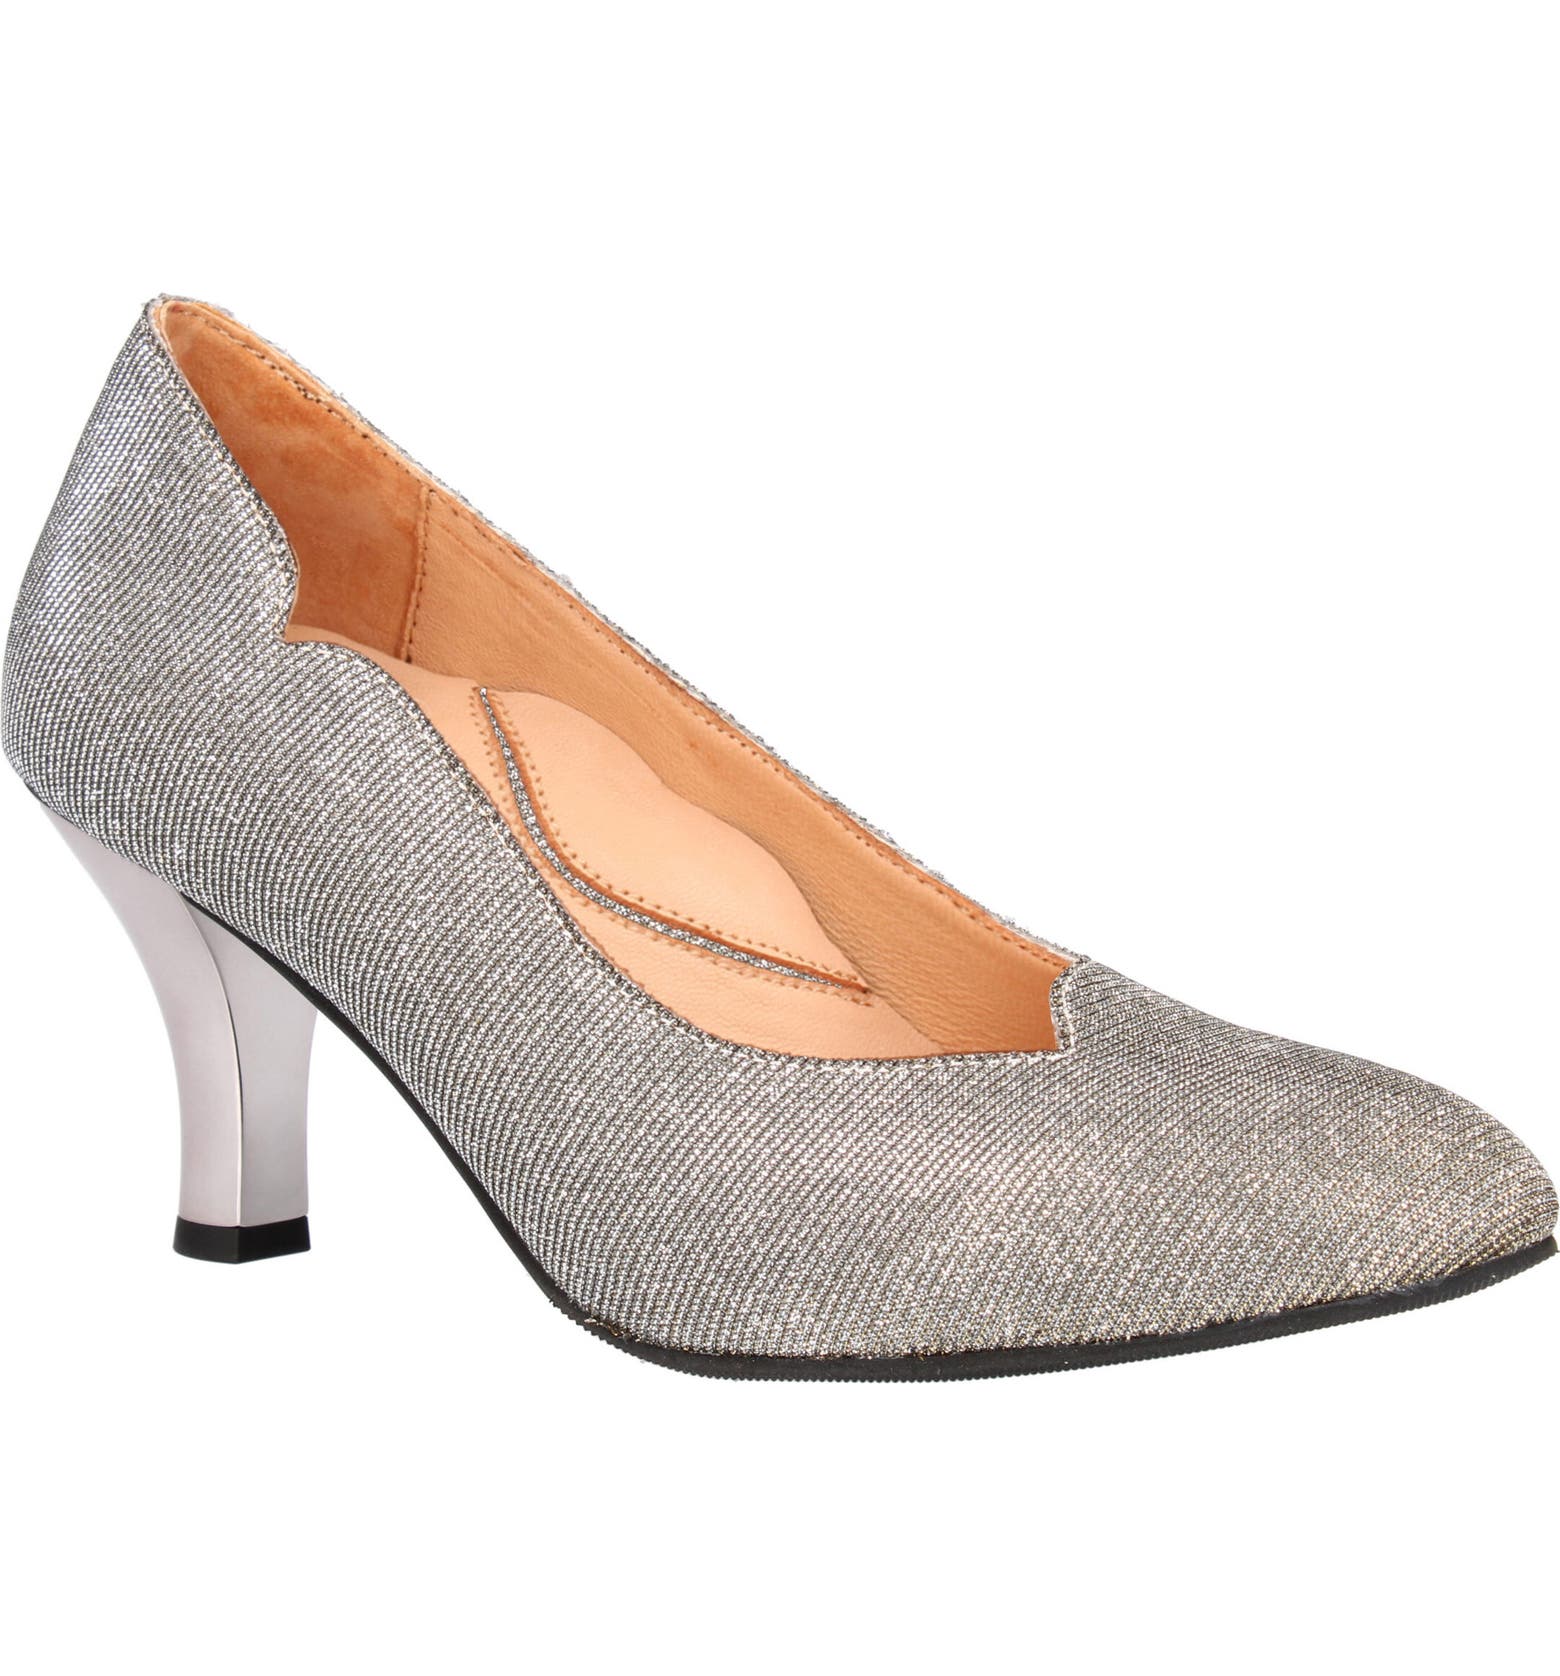 L'Amour des Pieds Bambelle Pointed Toe Pump (Women) | Nordstrom